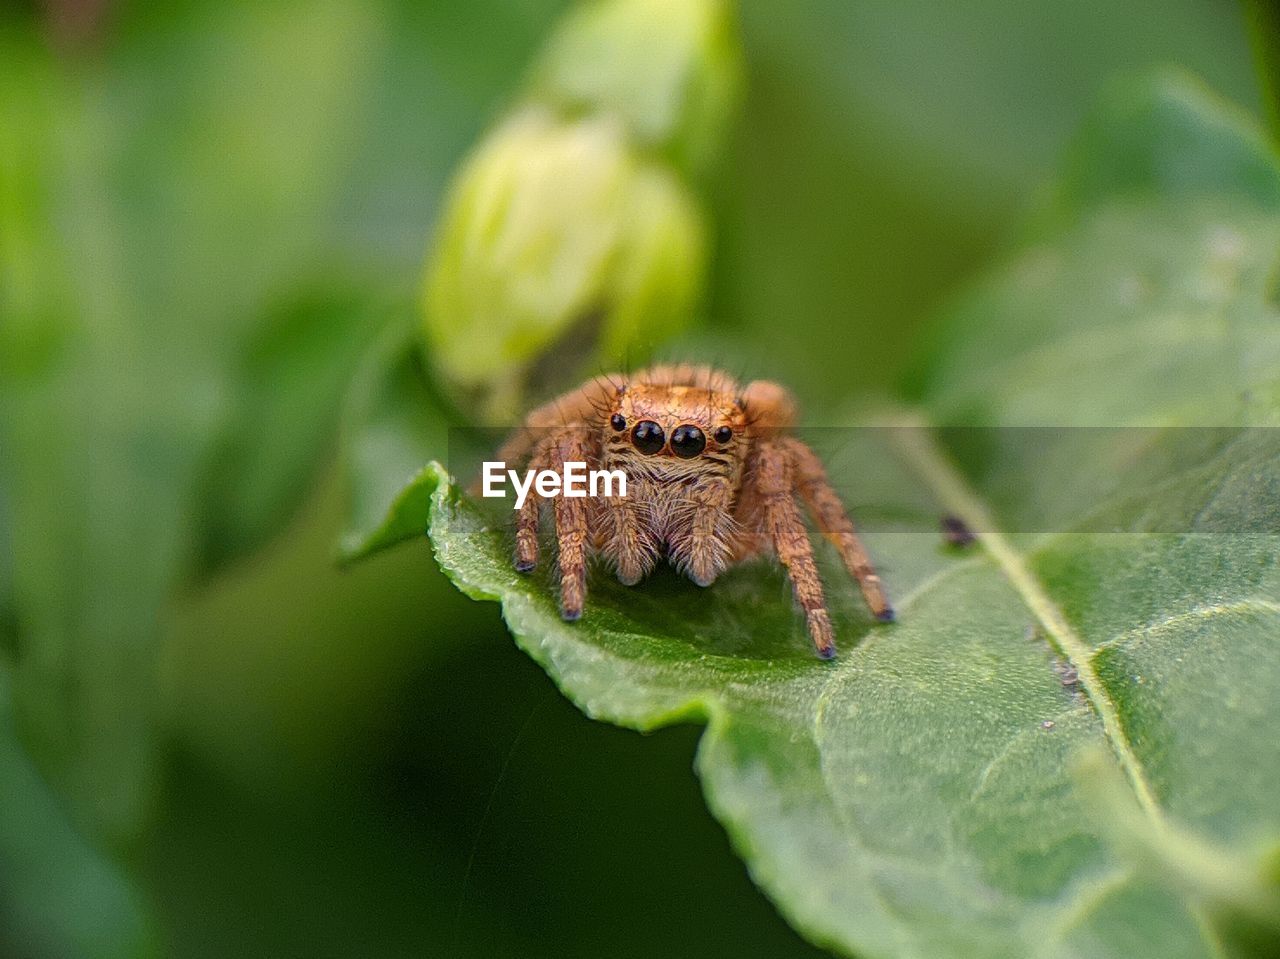 CLOSE-UP OF SPIDER ON A PLANT